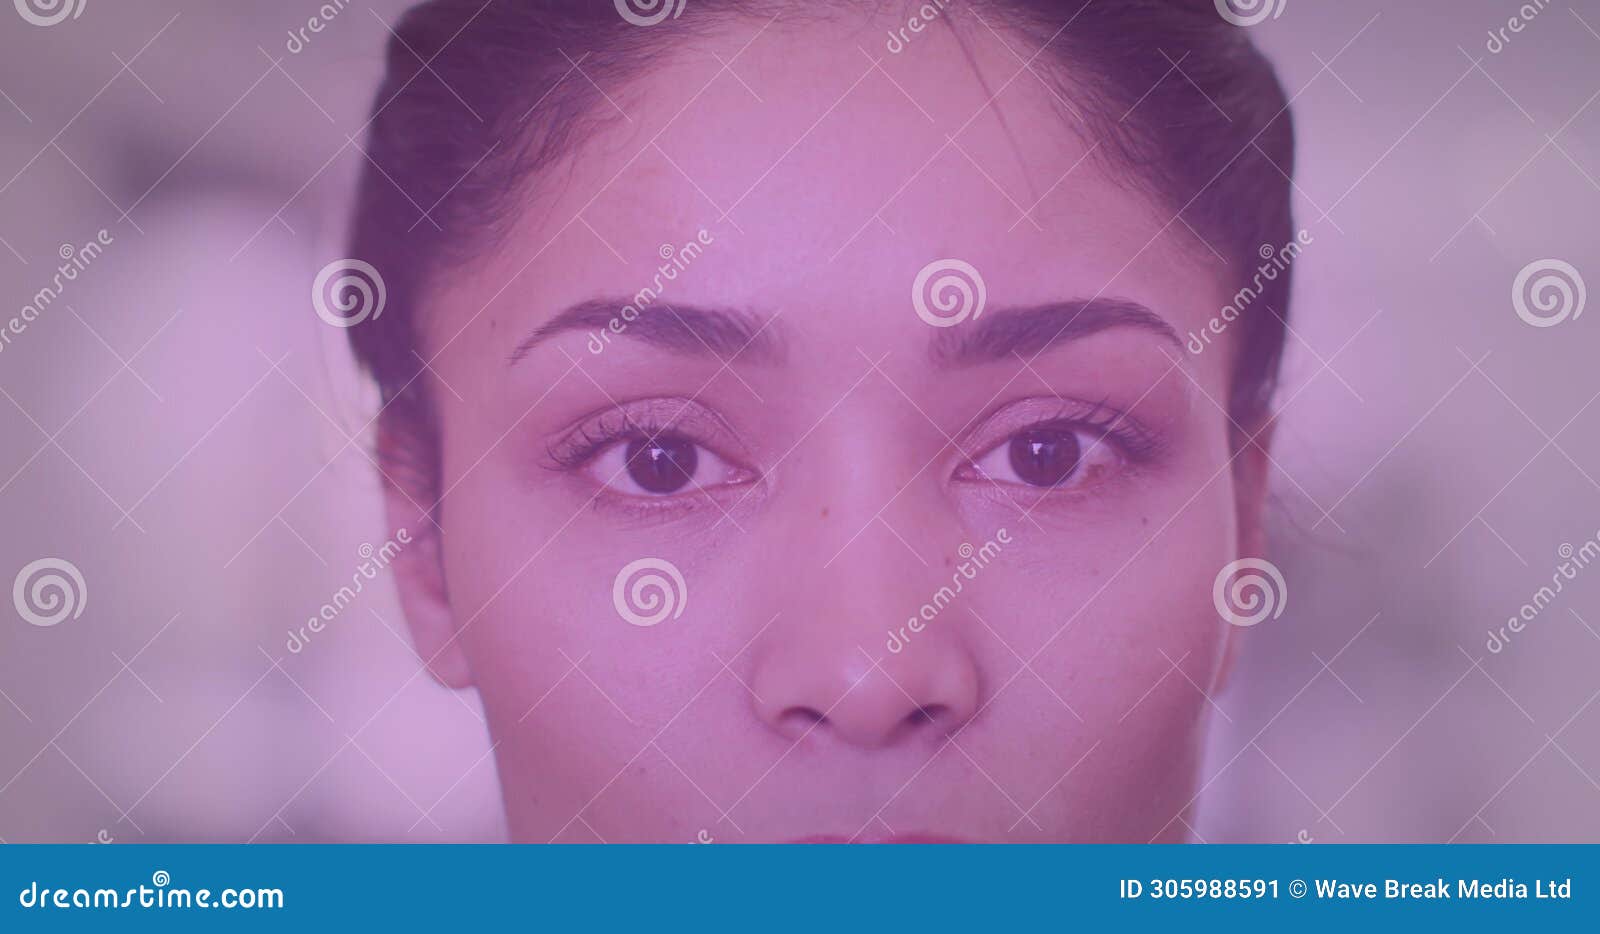 close-up of a young undefined woman's face, with copy space